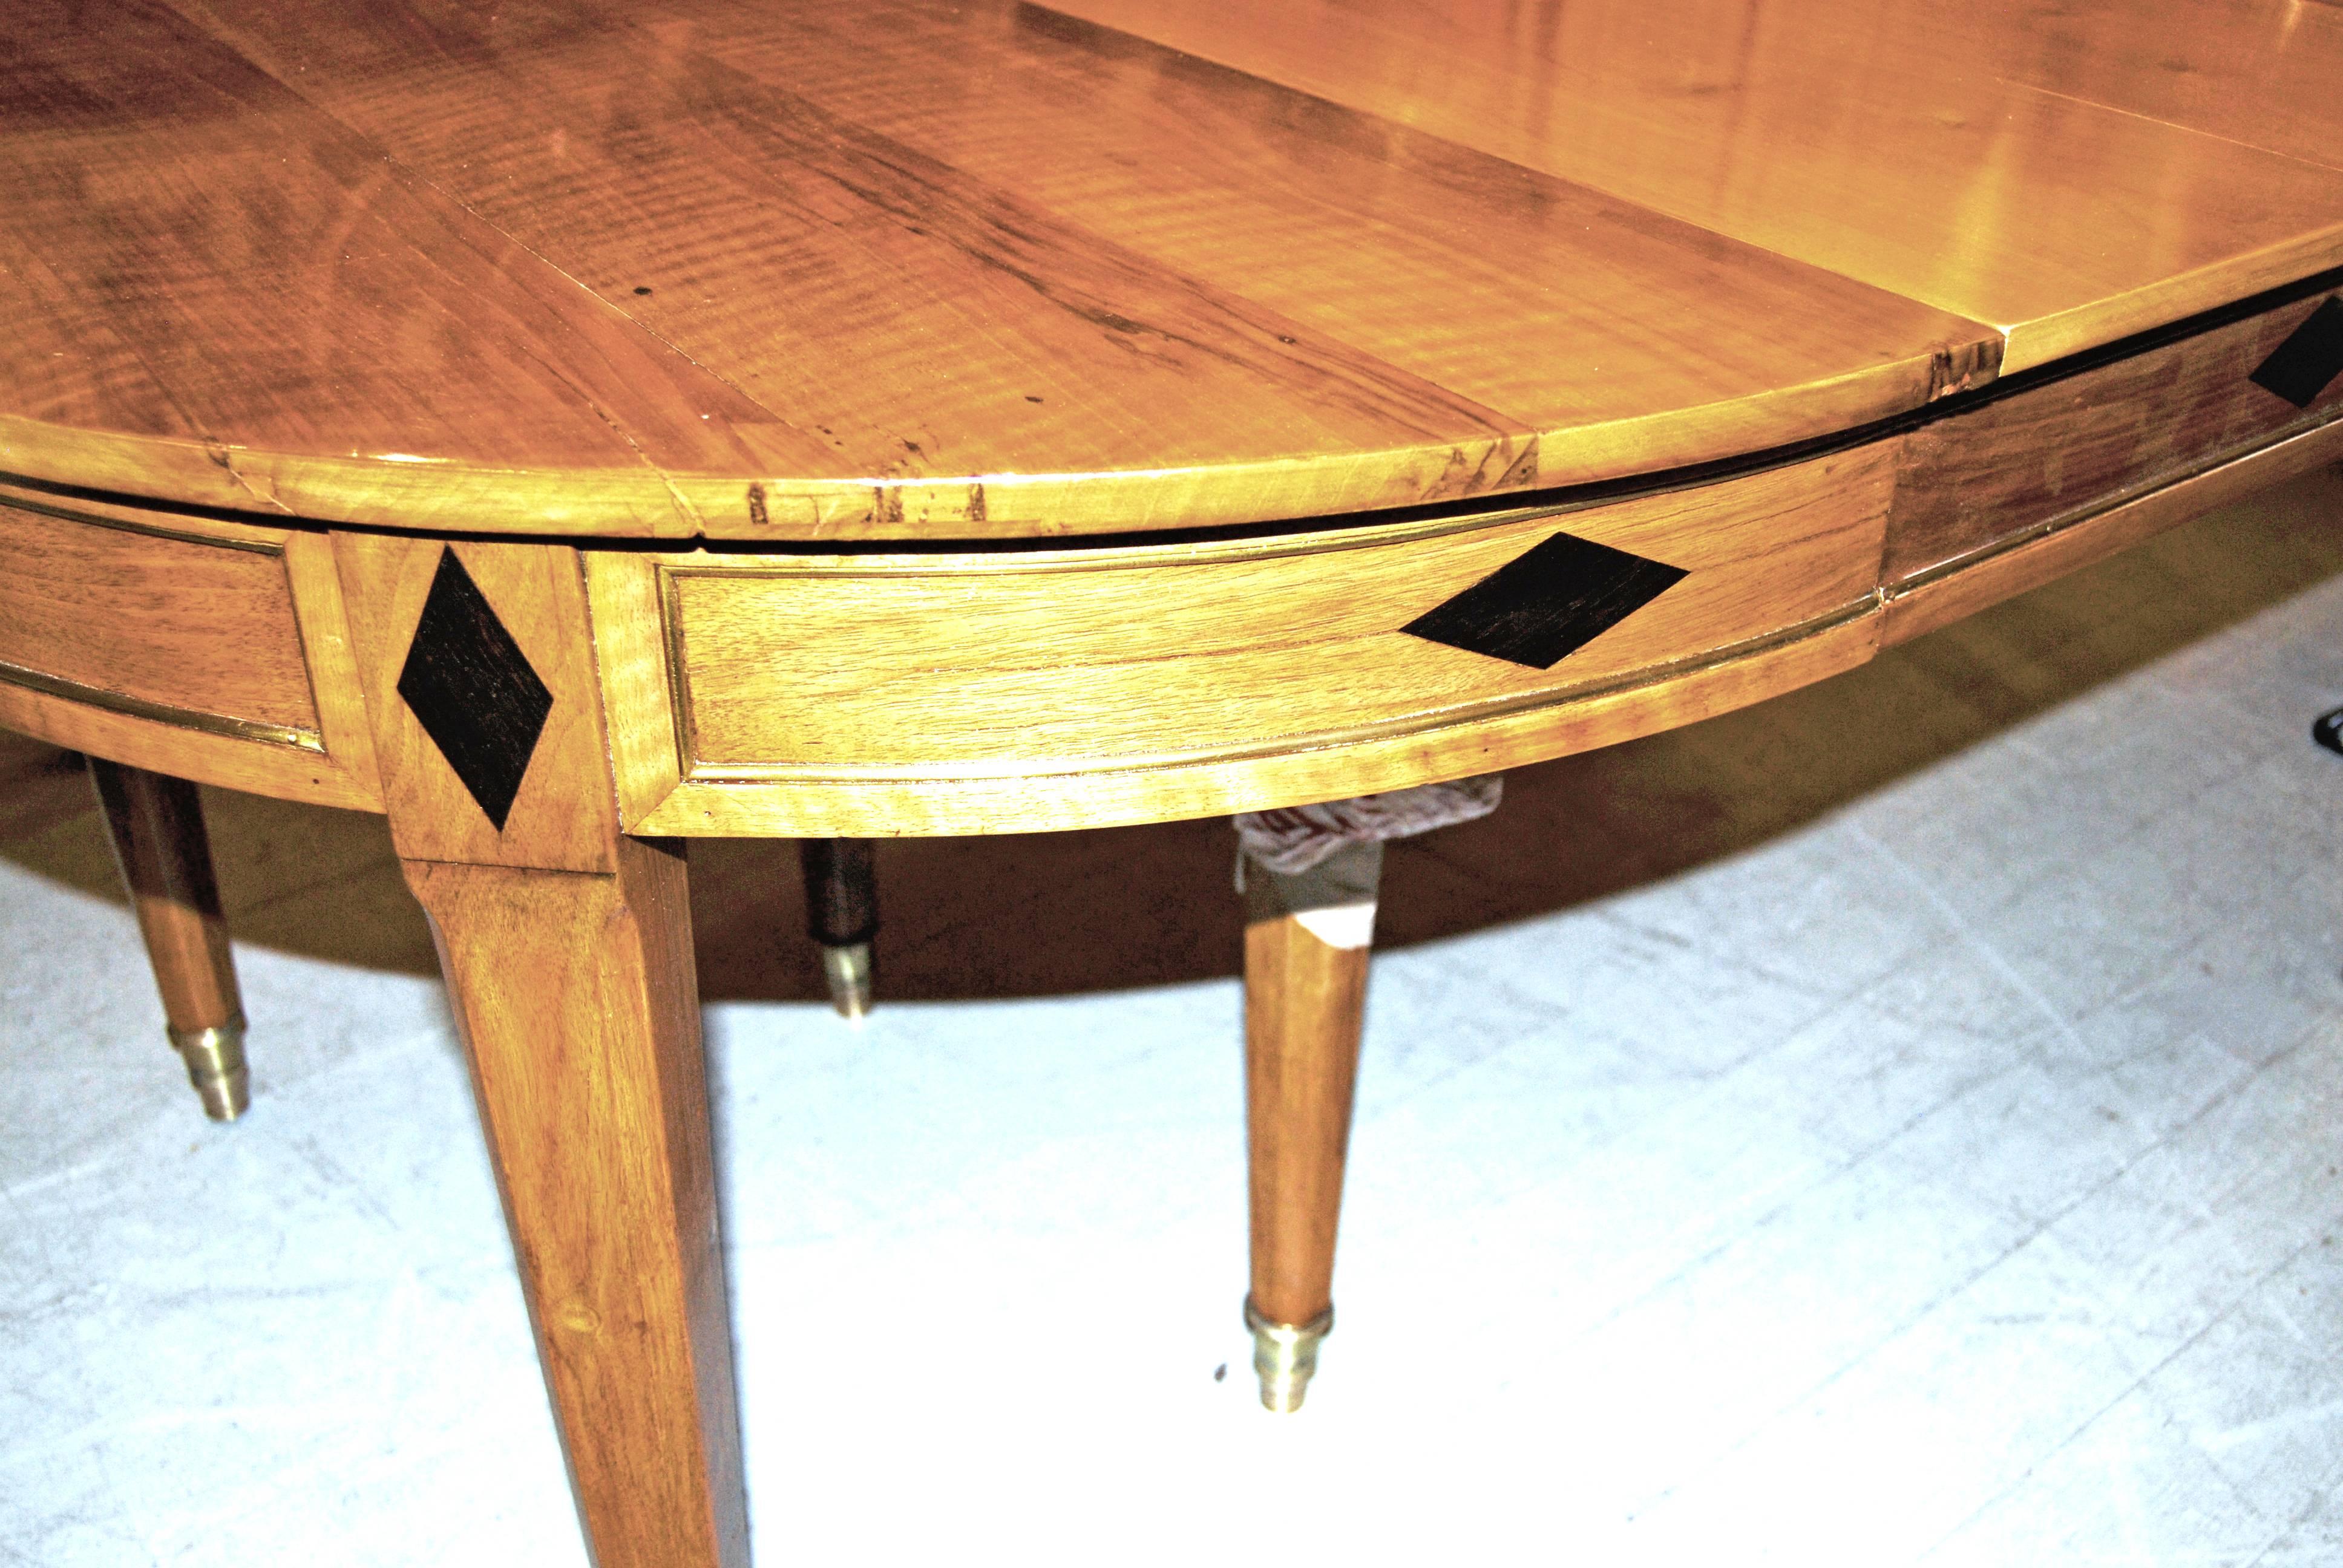 19th century Directoire style pearwood dining table.